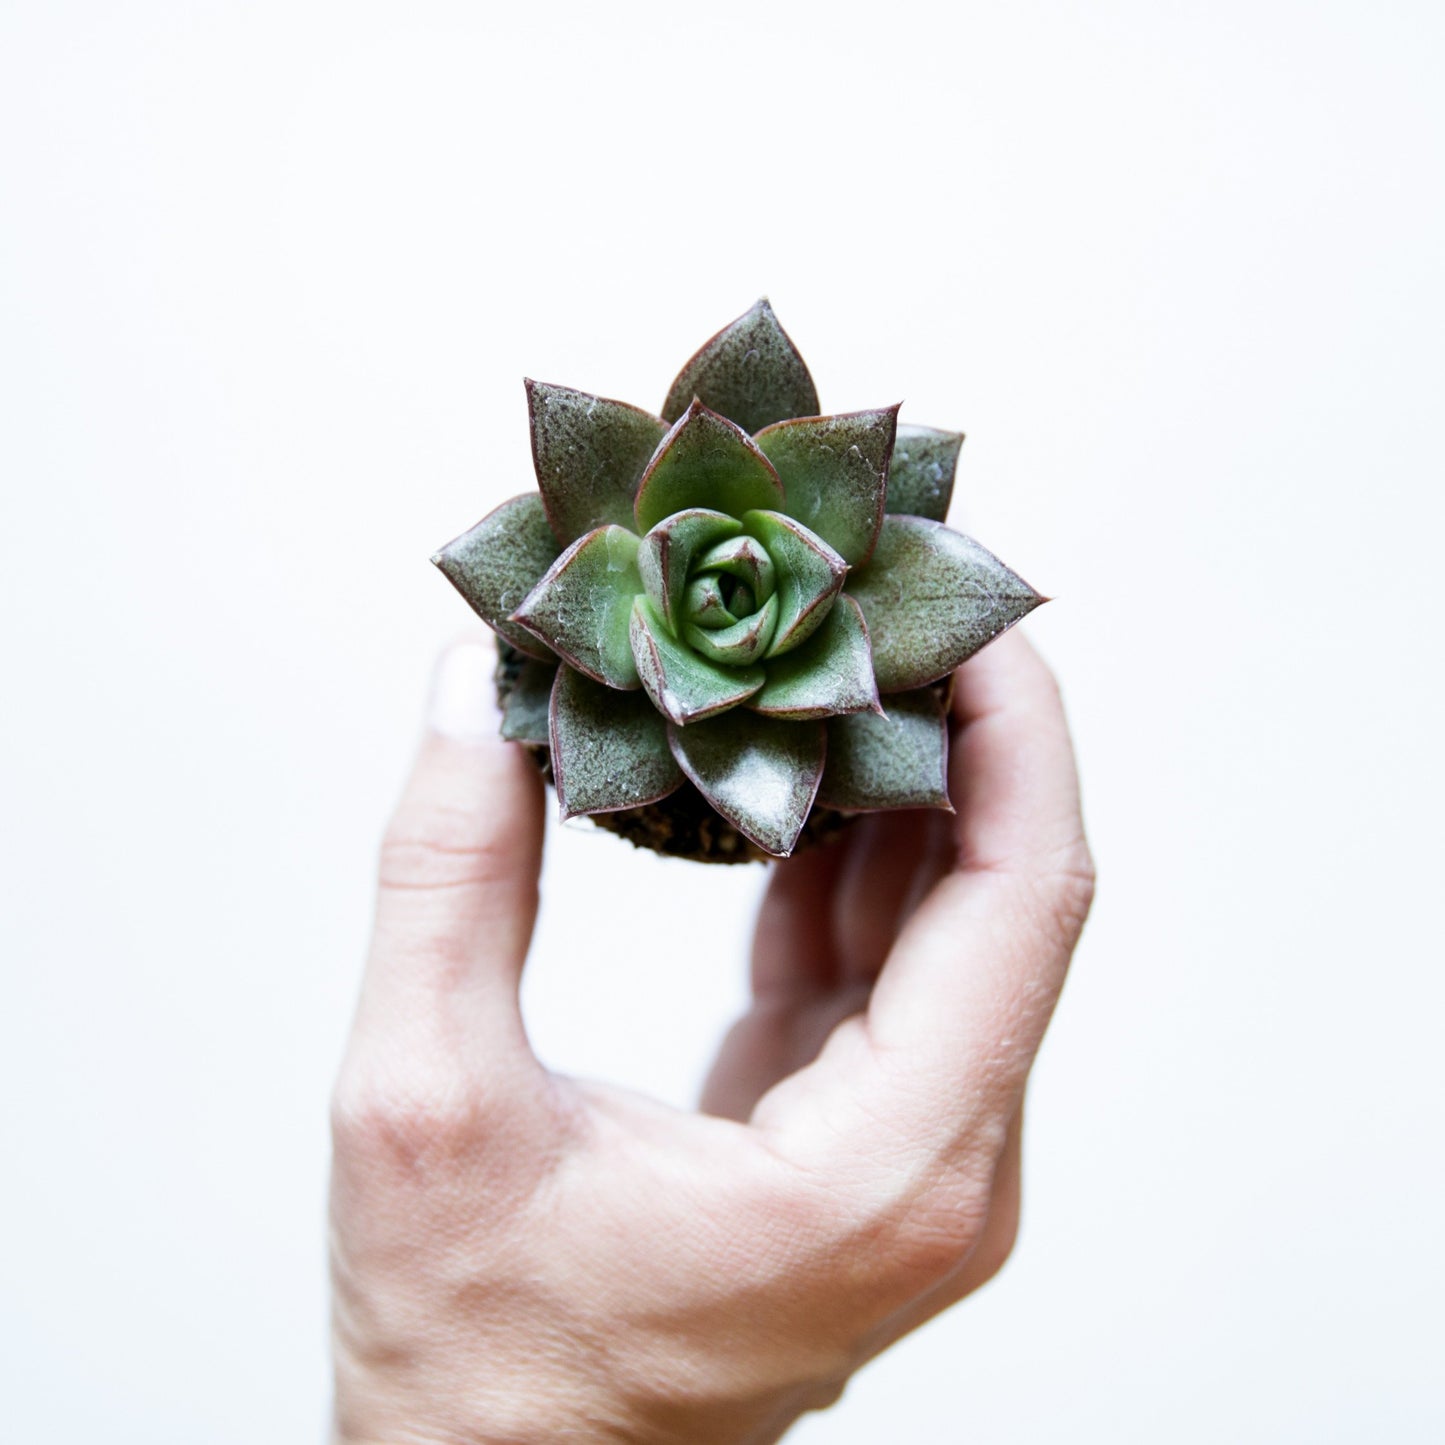 On a white background is a model holding up a Echeveria Purposum Succulent.